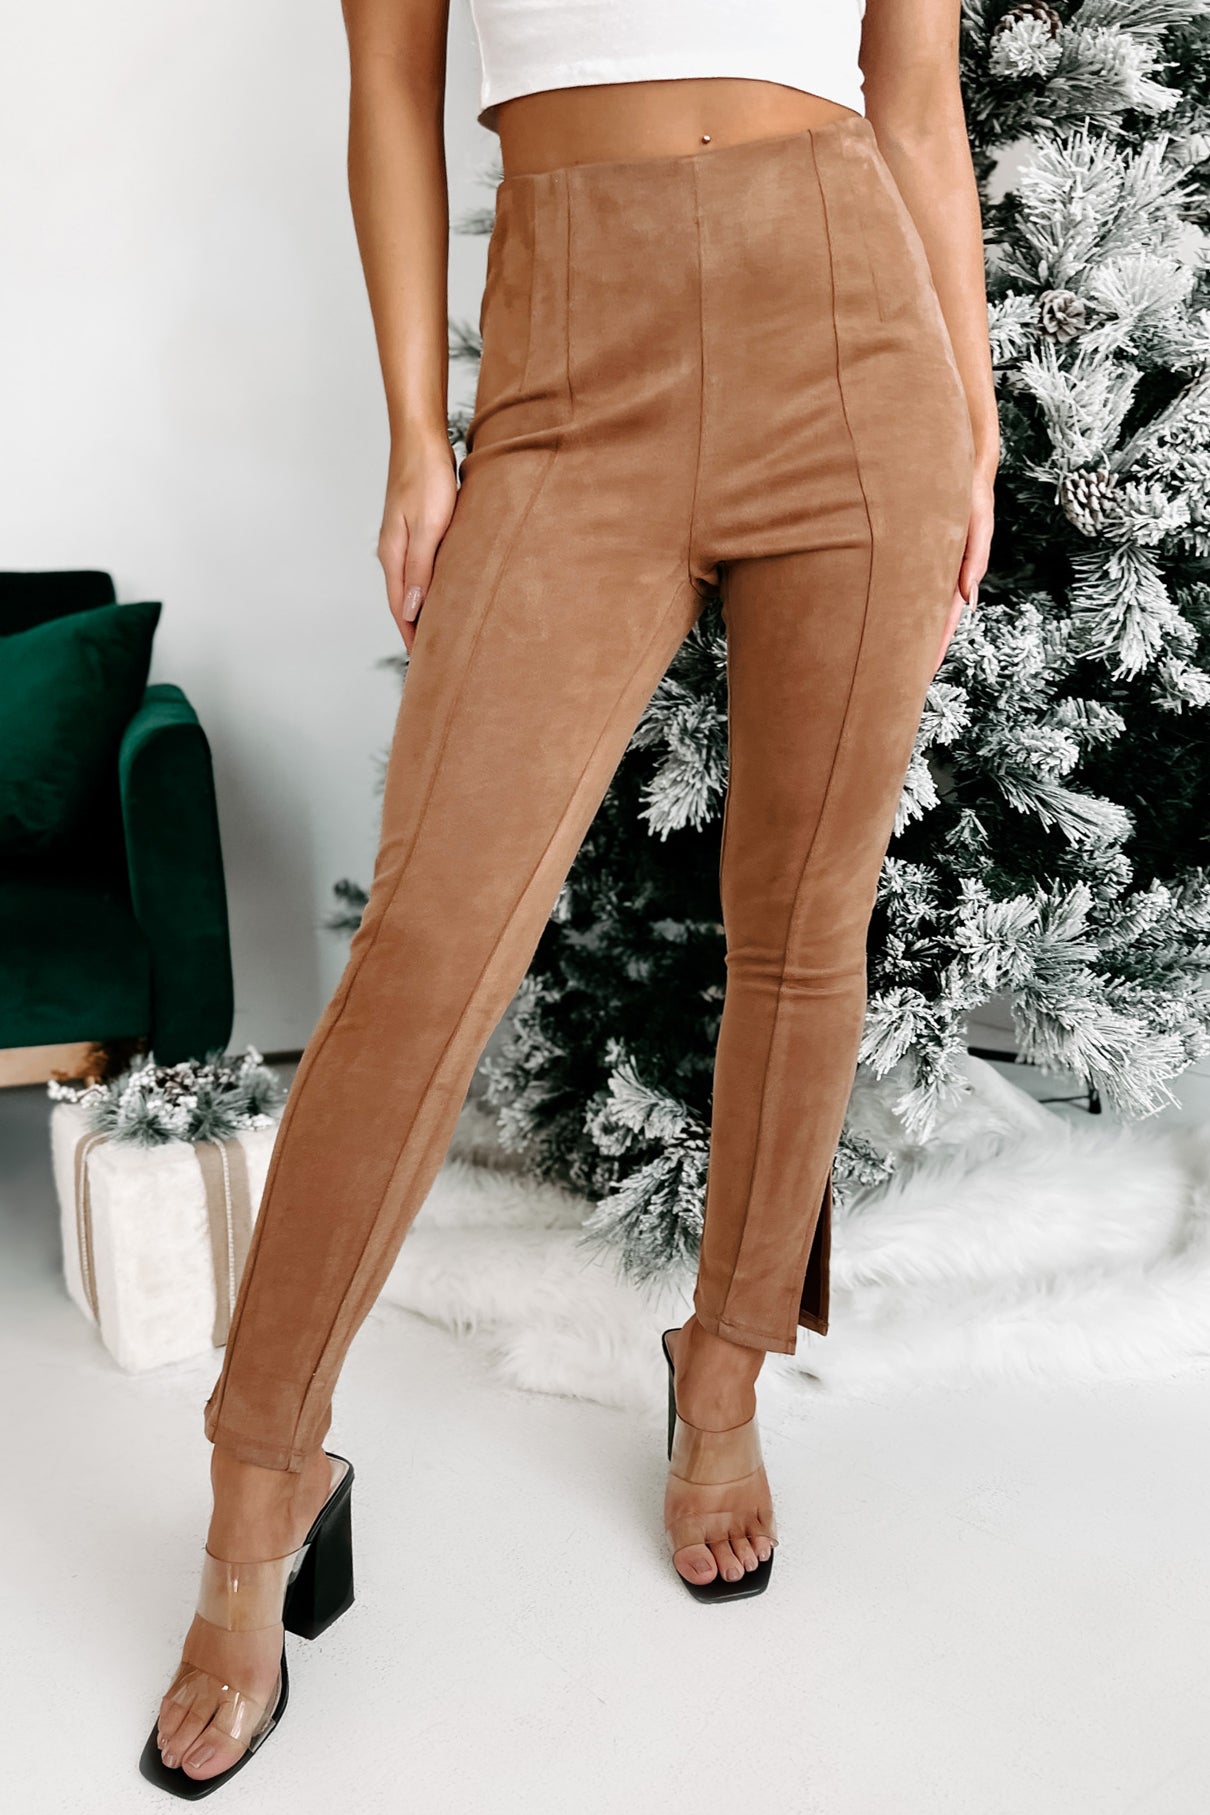 Stepping into fall with style in these camel faux suede pants